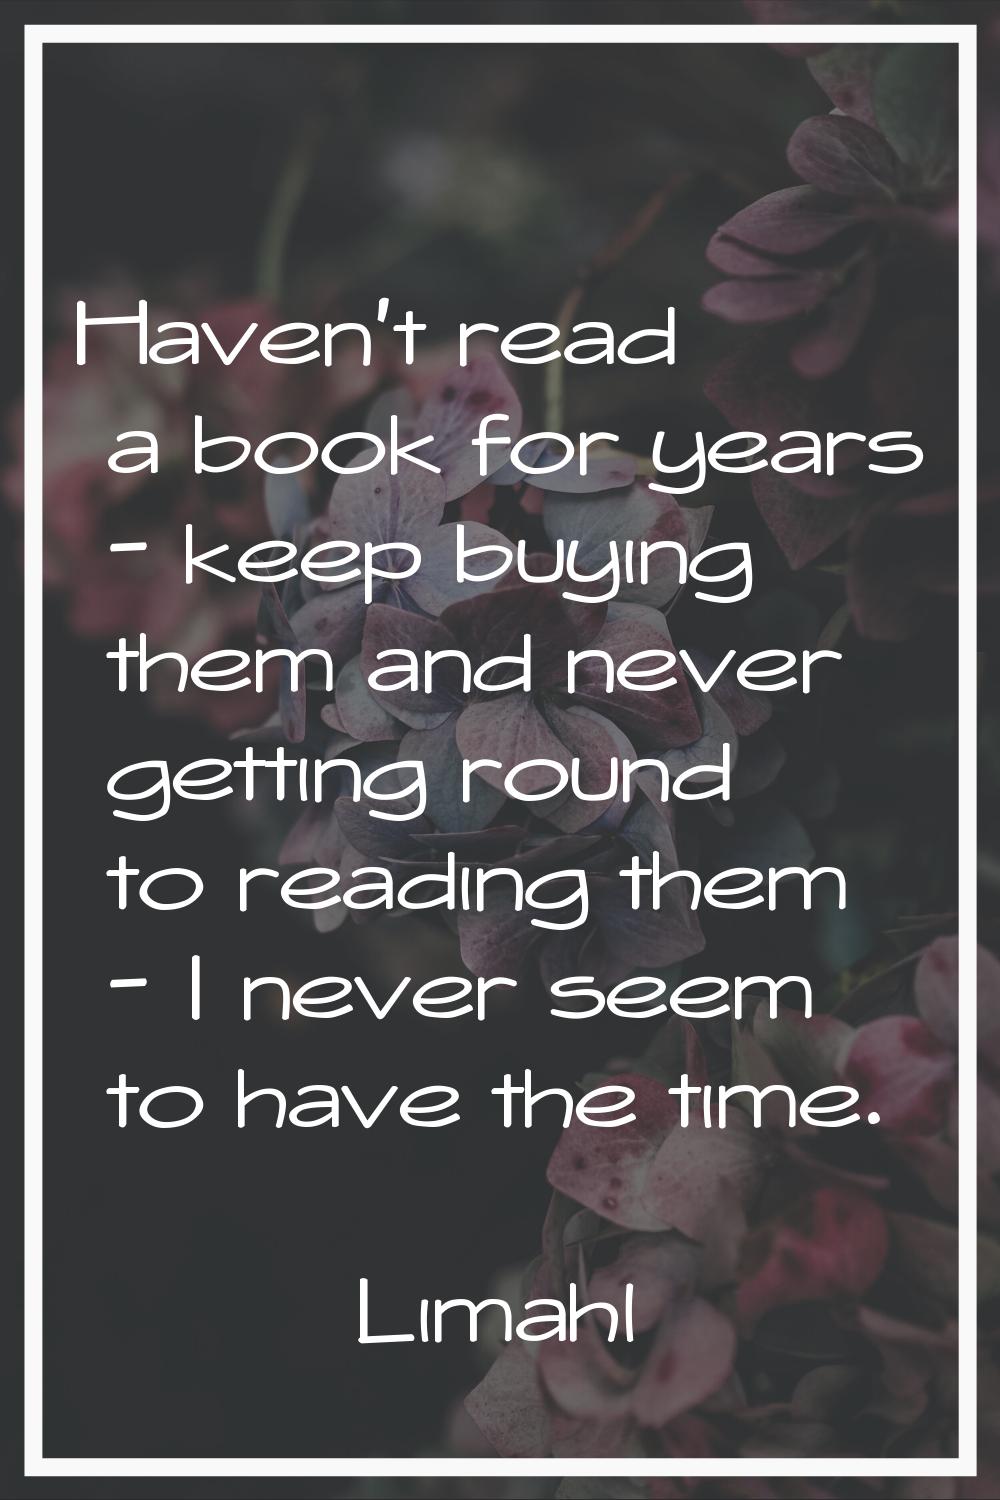 Haven't read a book for years - keep buying them and never getting round to reading them - I never 